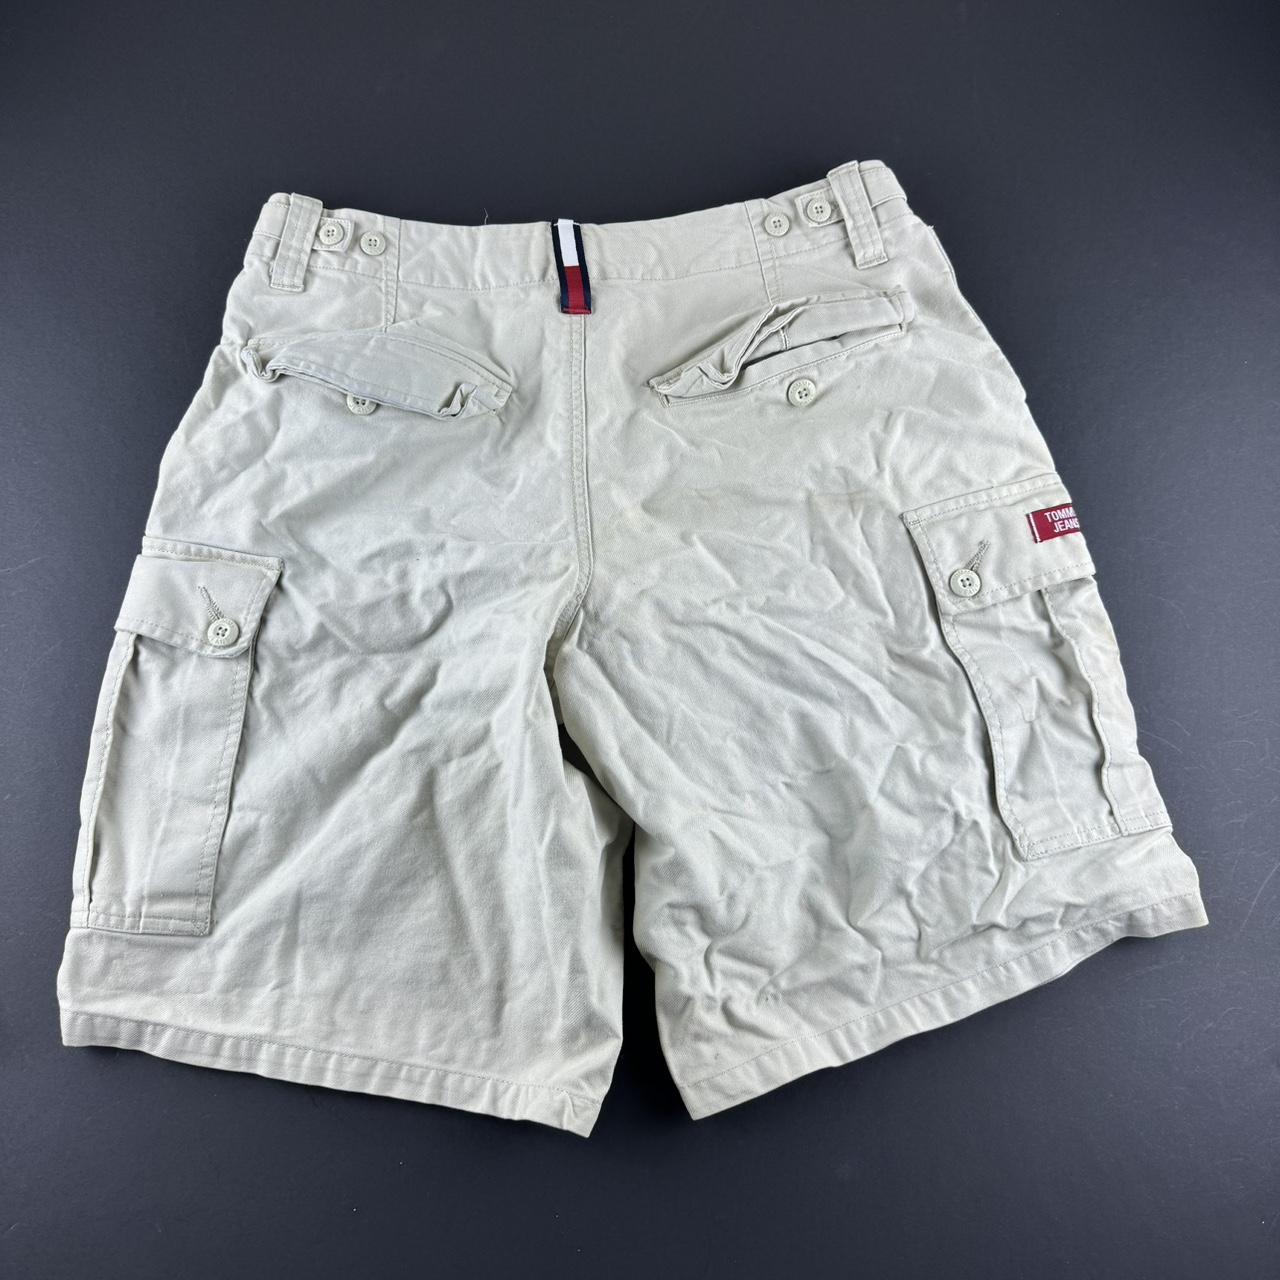 Tommy Hilfiger Men's Cream and Tan Shorts (2)